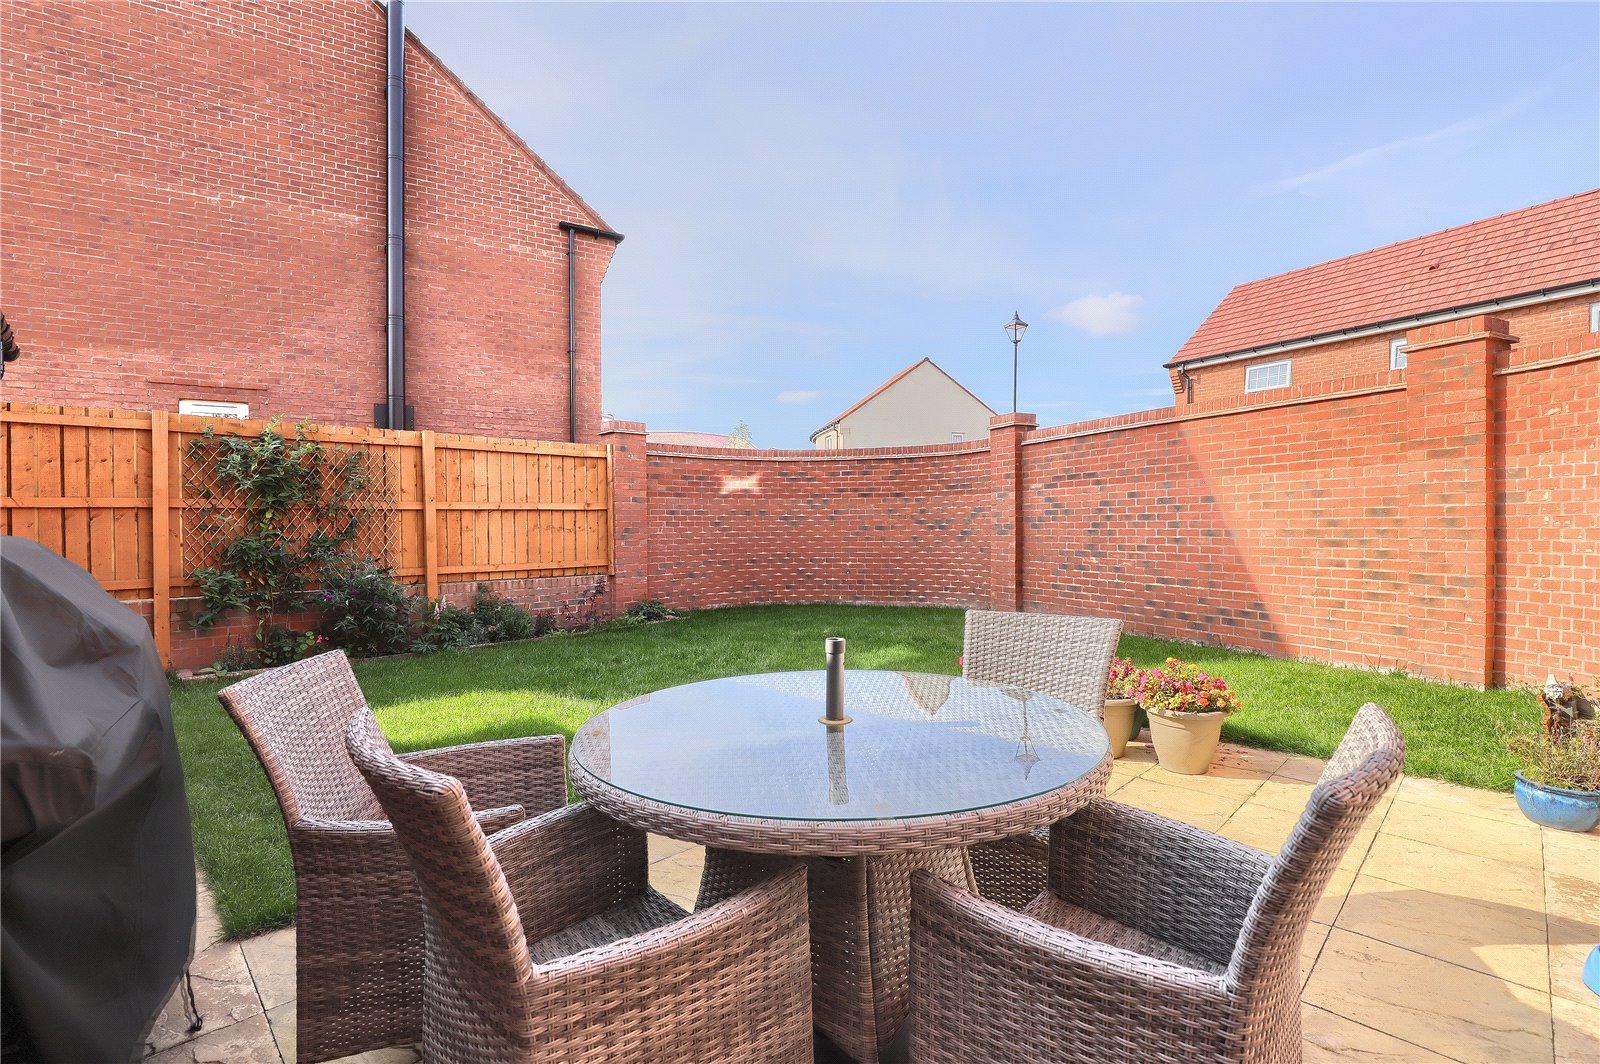 3 bed house for sale in Ayton Meadows, Nunthorpe  - Property Image 2